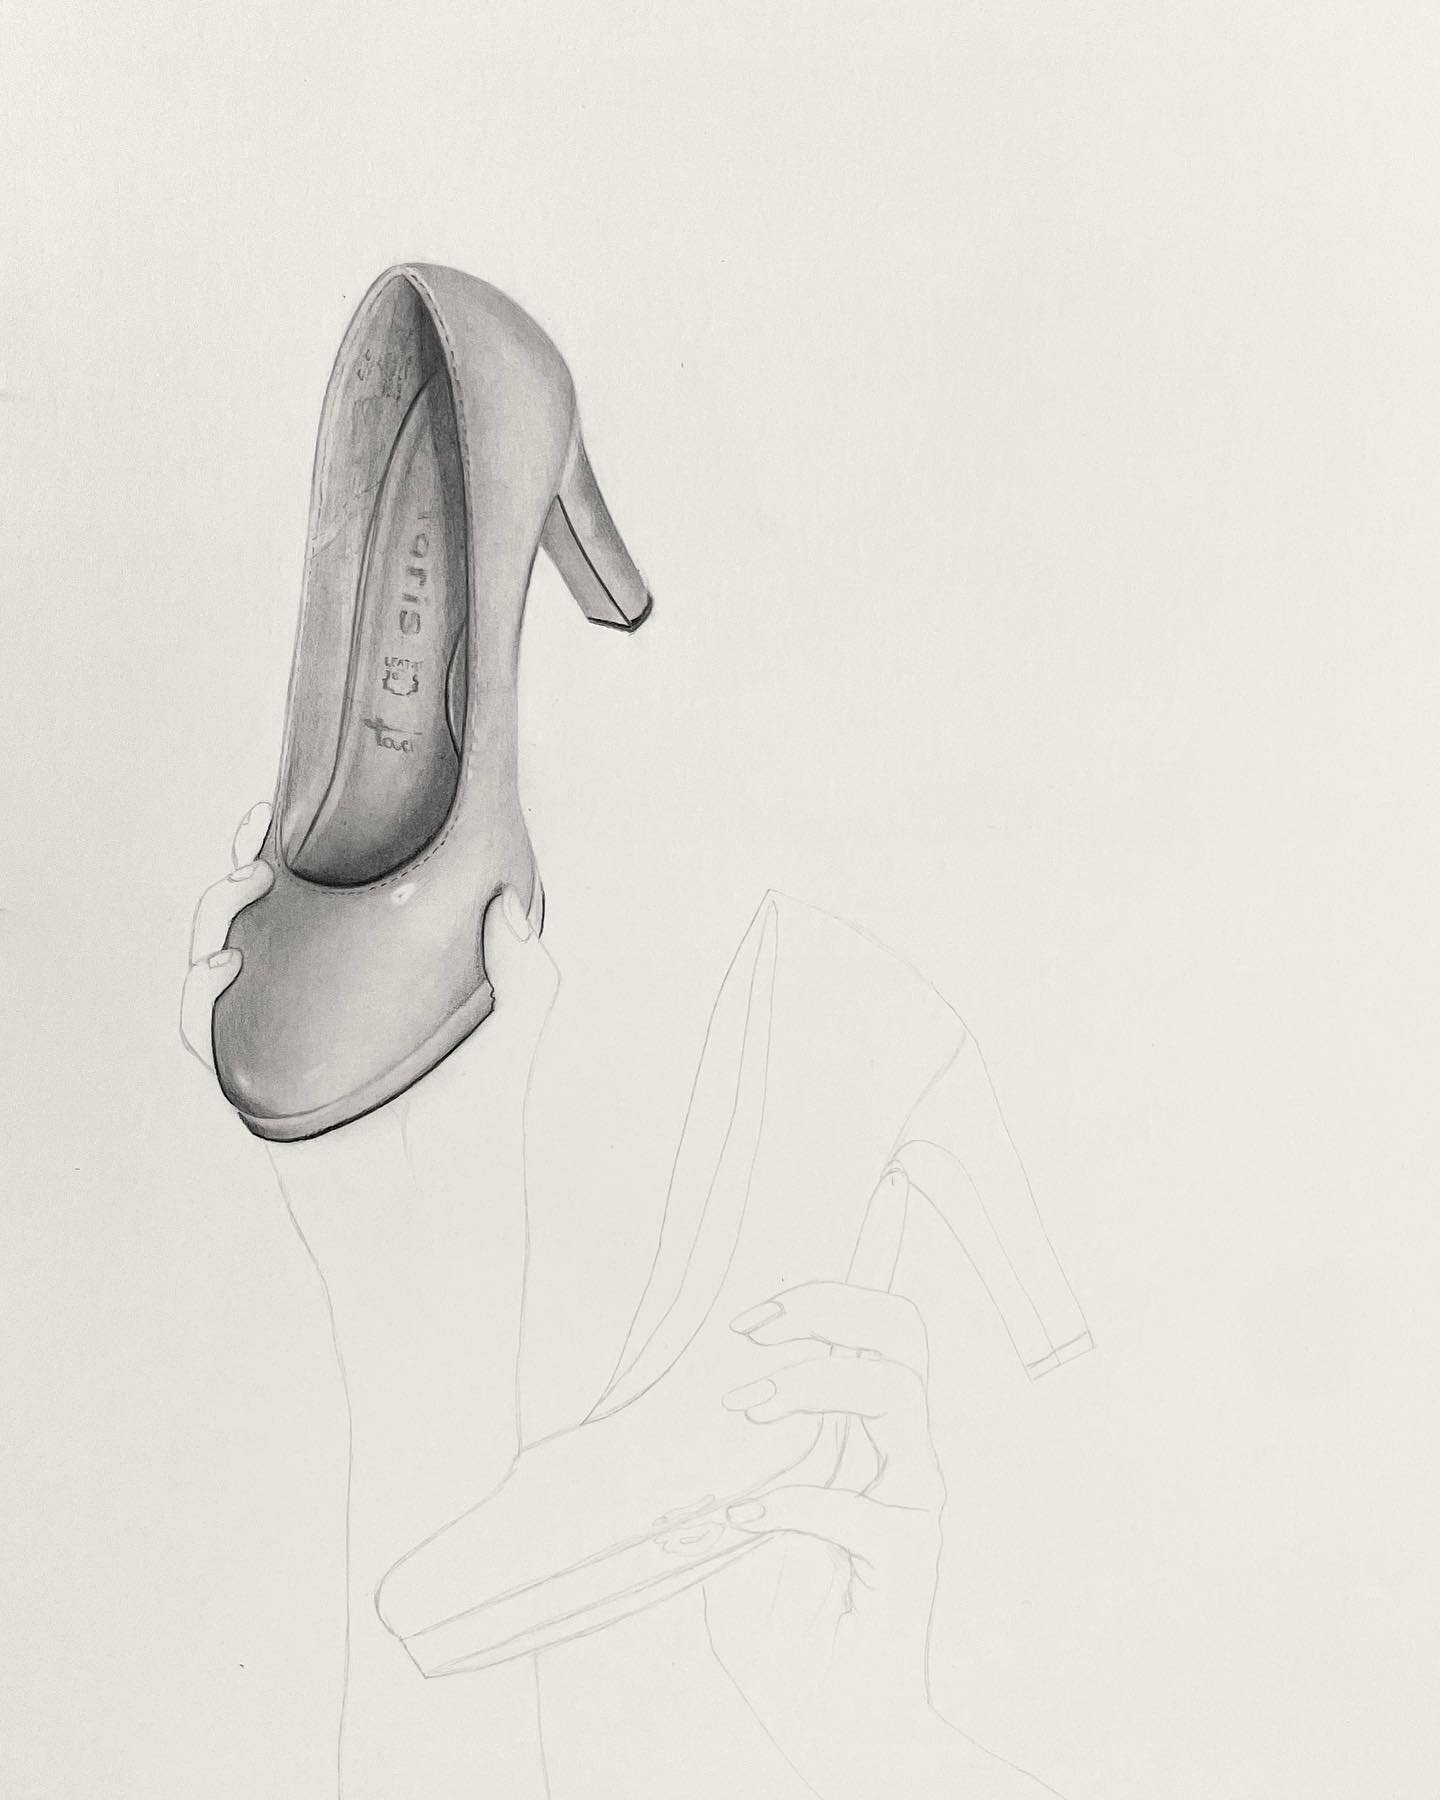 Sometimes I like to draw random things in between projects. This is one of those times 👠 #wip 

Drawn with @staedtler pencils on A3 @magnani1404official cold pressed paper

#workinprogress #randomart #heels #shoes #pencil #drawing #graphite #figure 